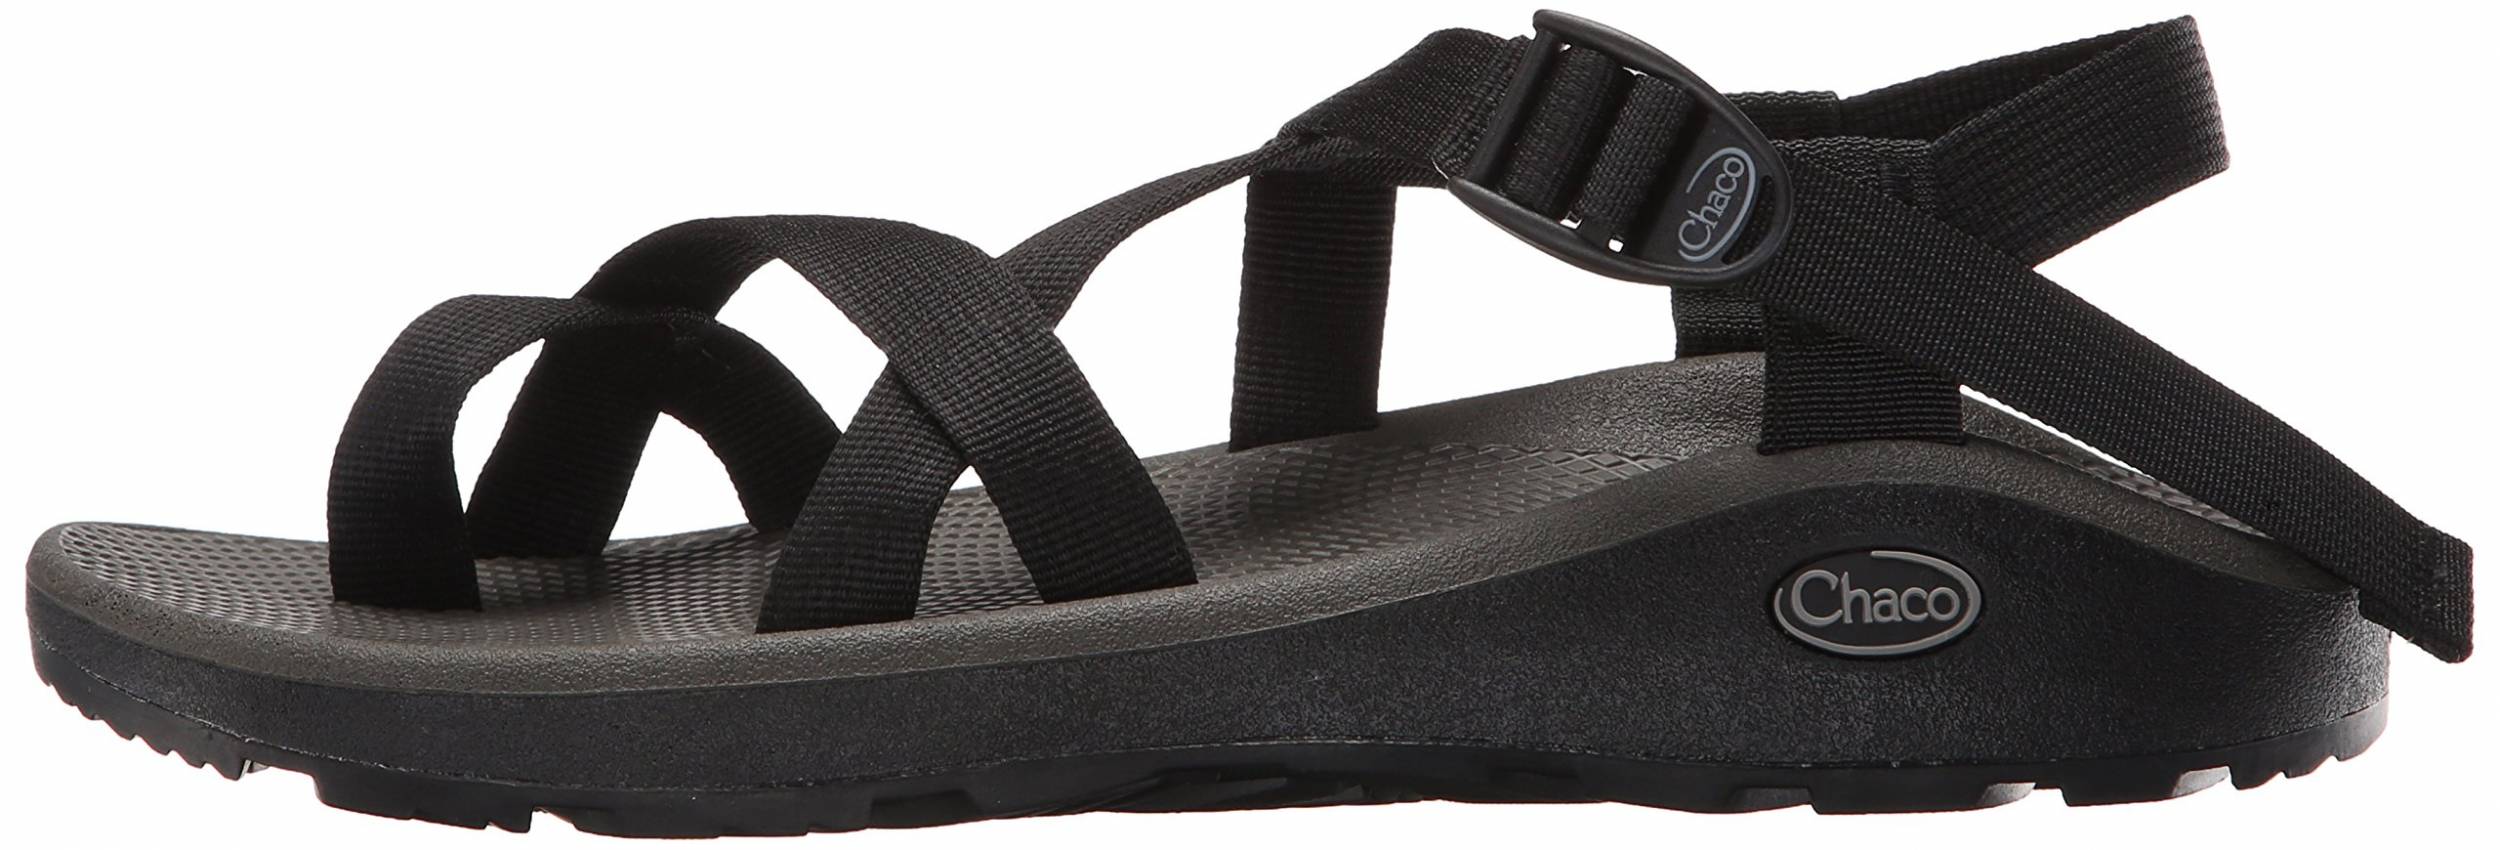 black chacos